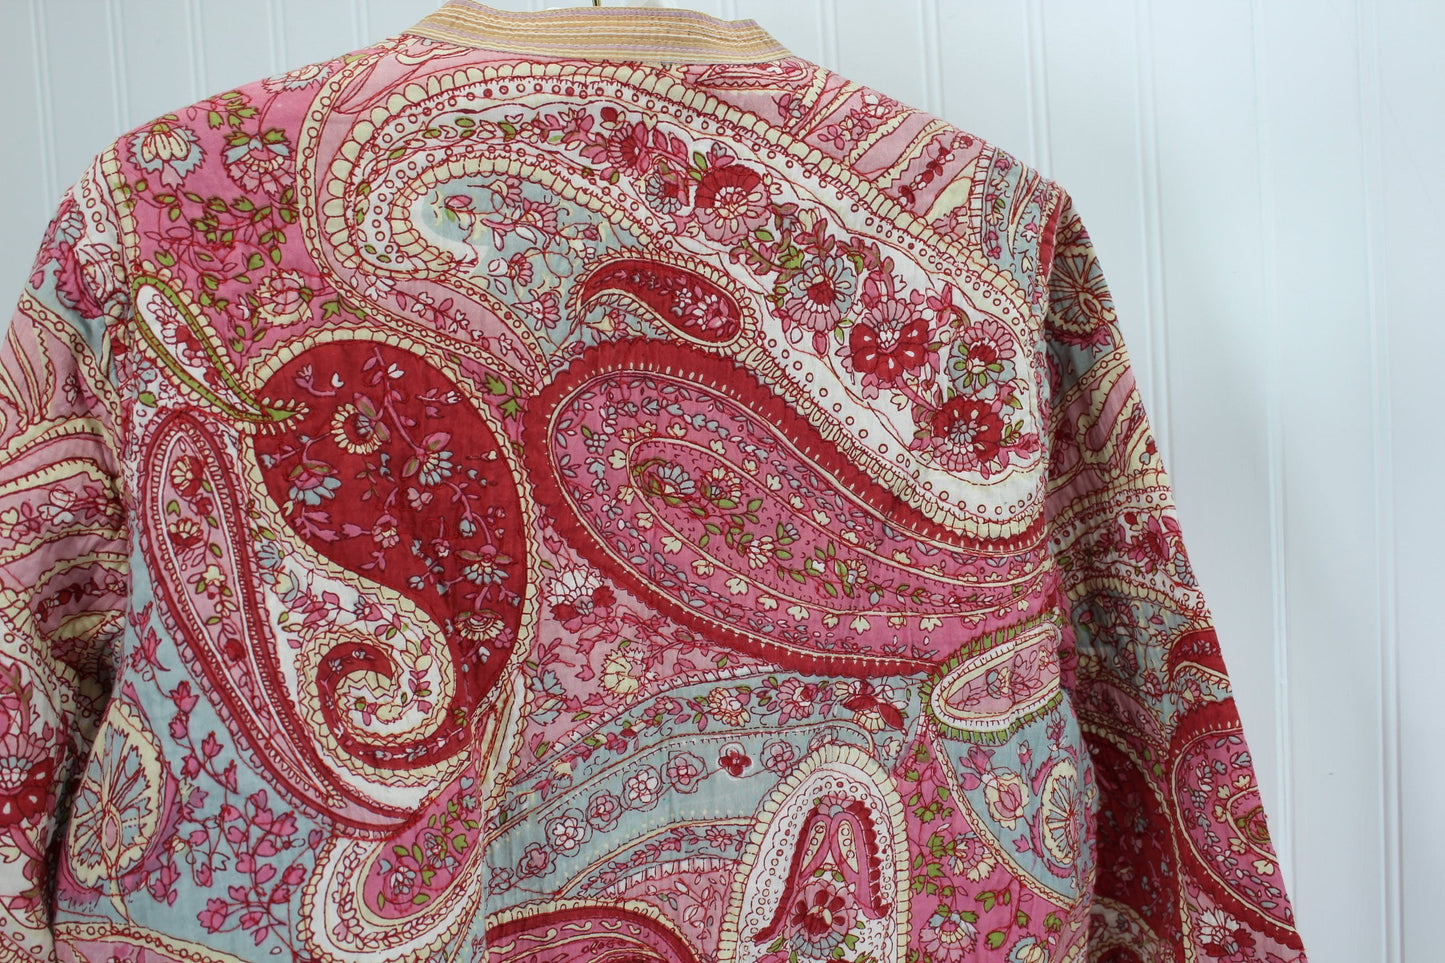 Reversible Quilted Jacket Vera Style Paisley Rose Pink Cream white